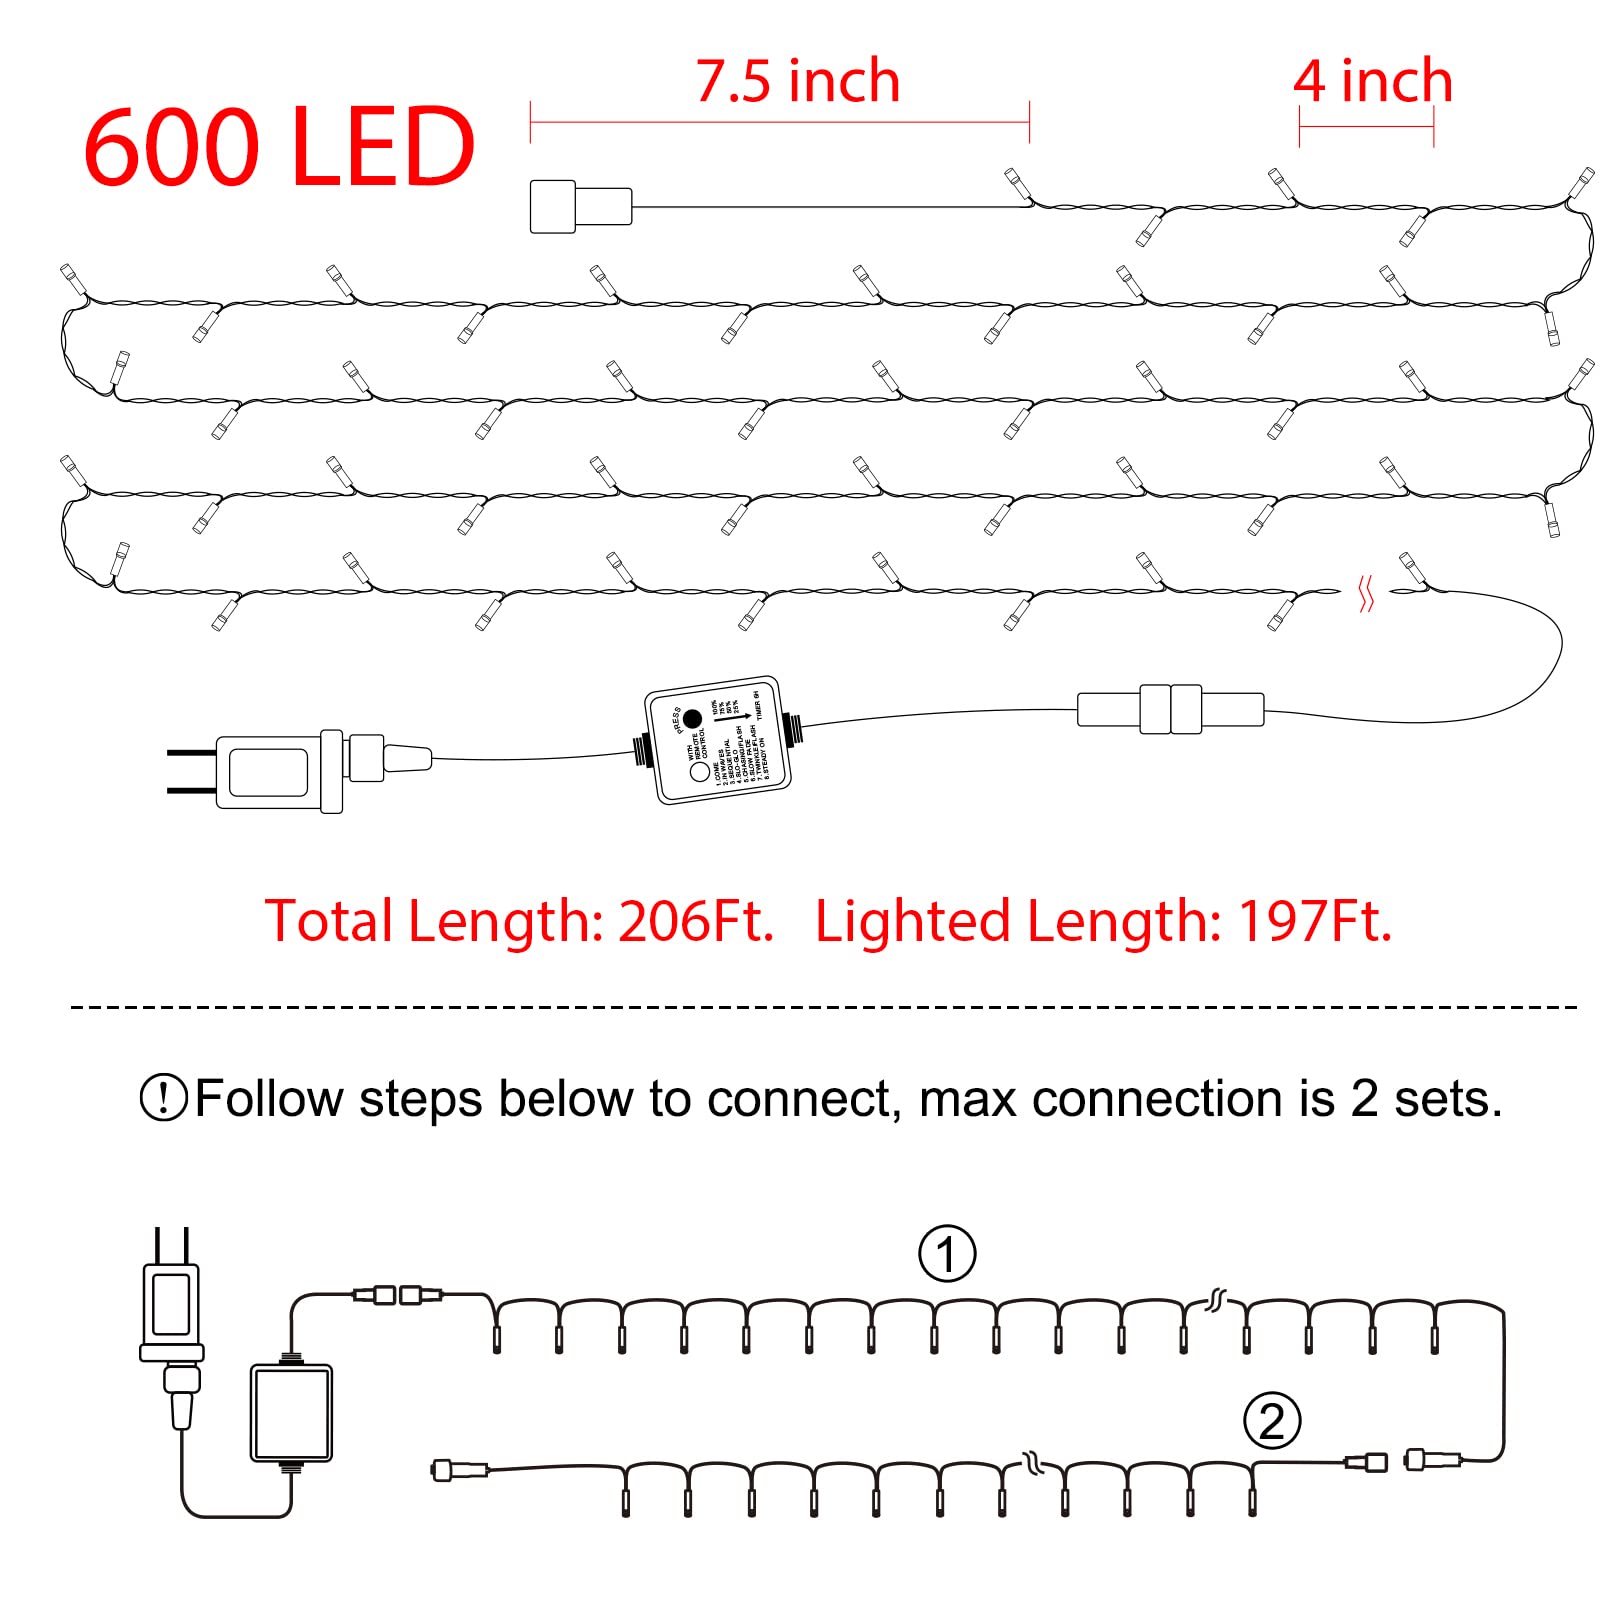 168 Feet / 600 LED / Blue / Green Wire